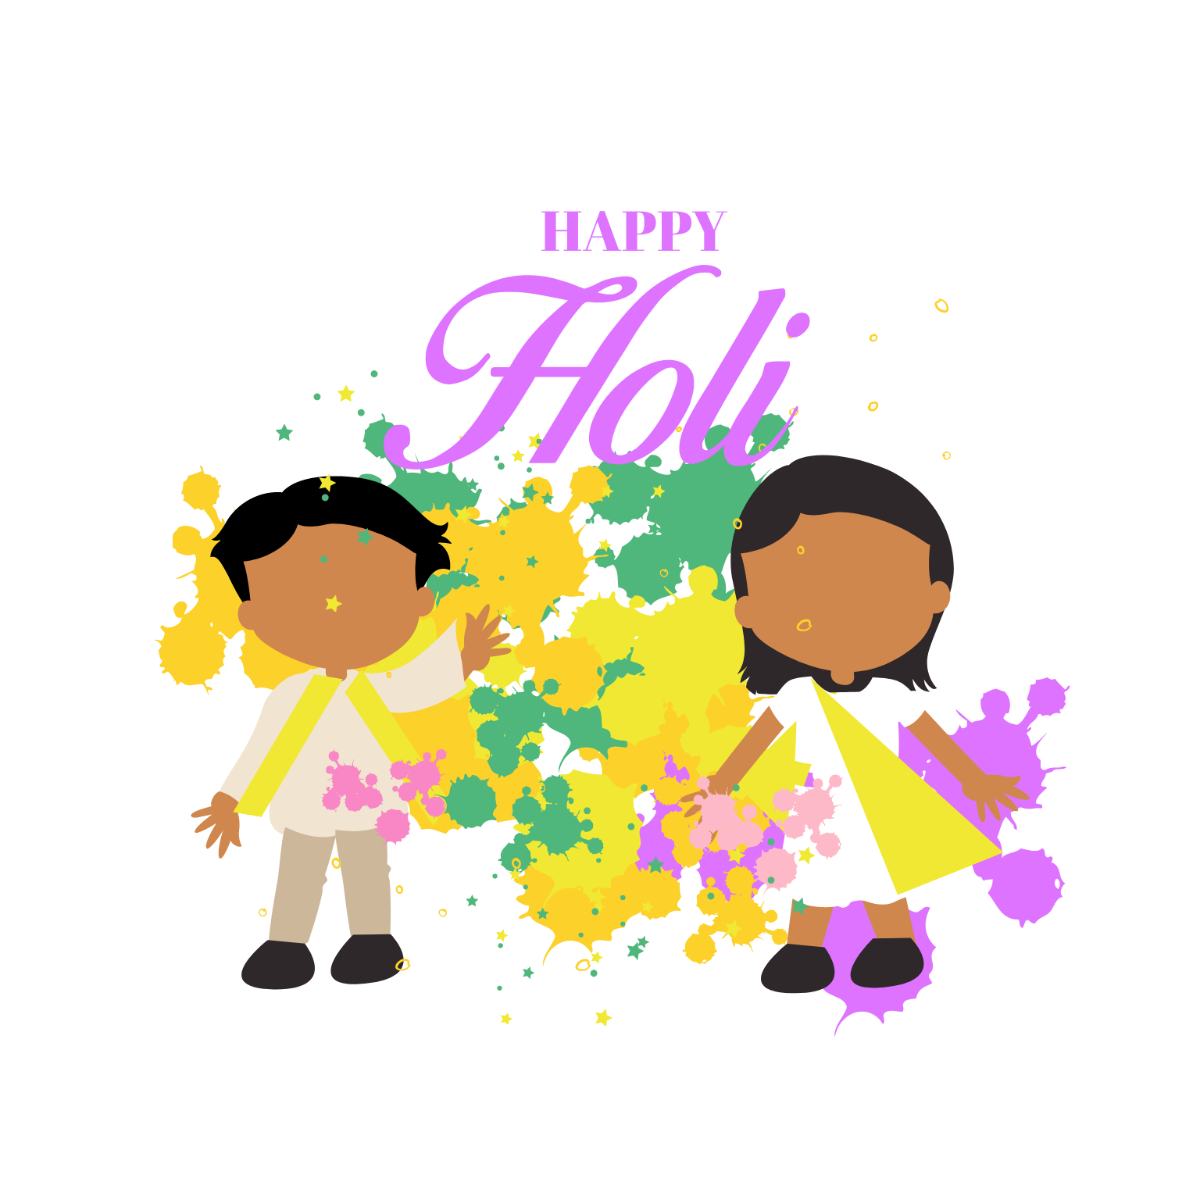 Short Essay on Holi in English for Students